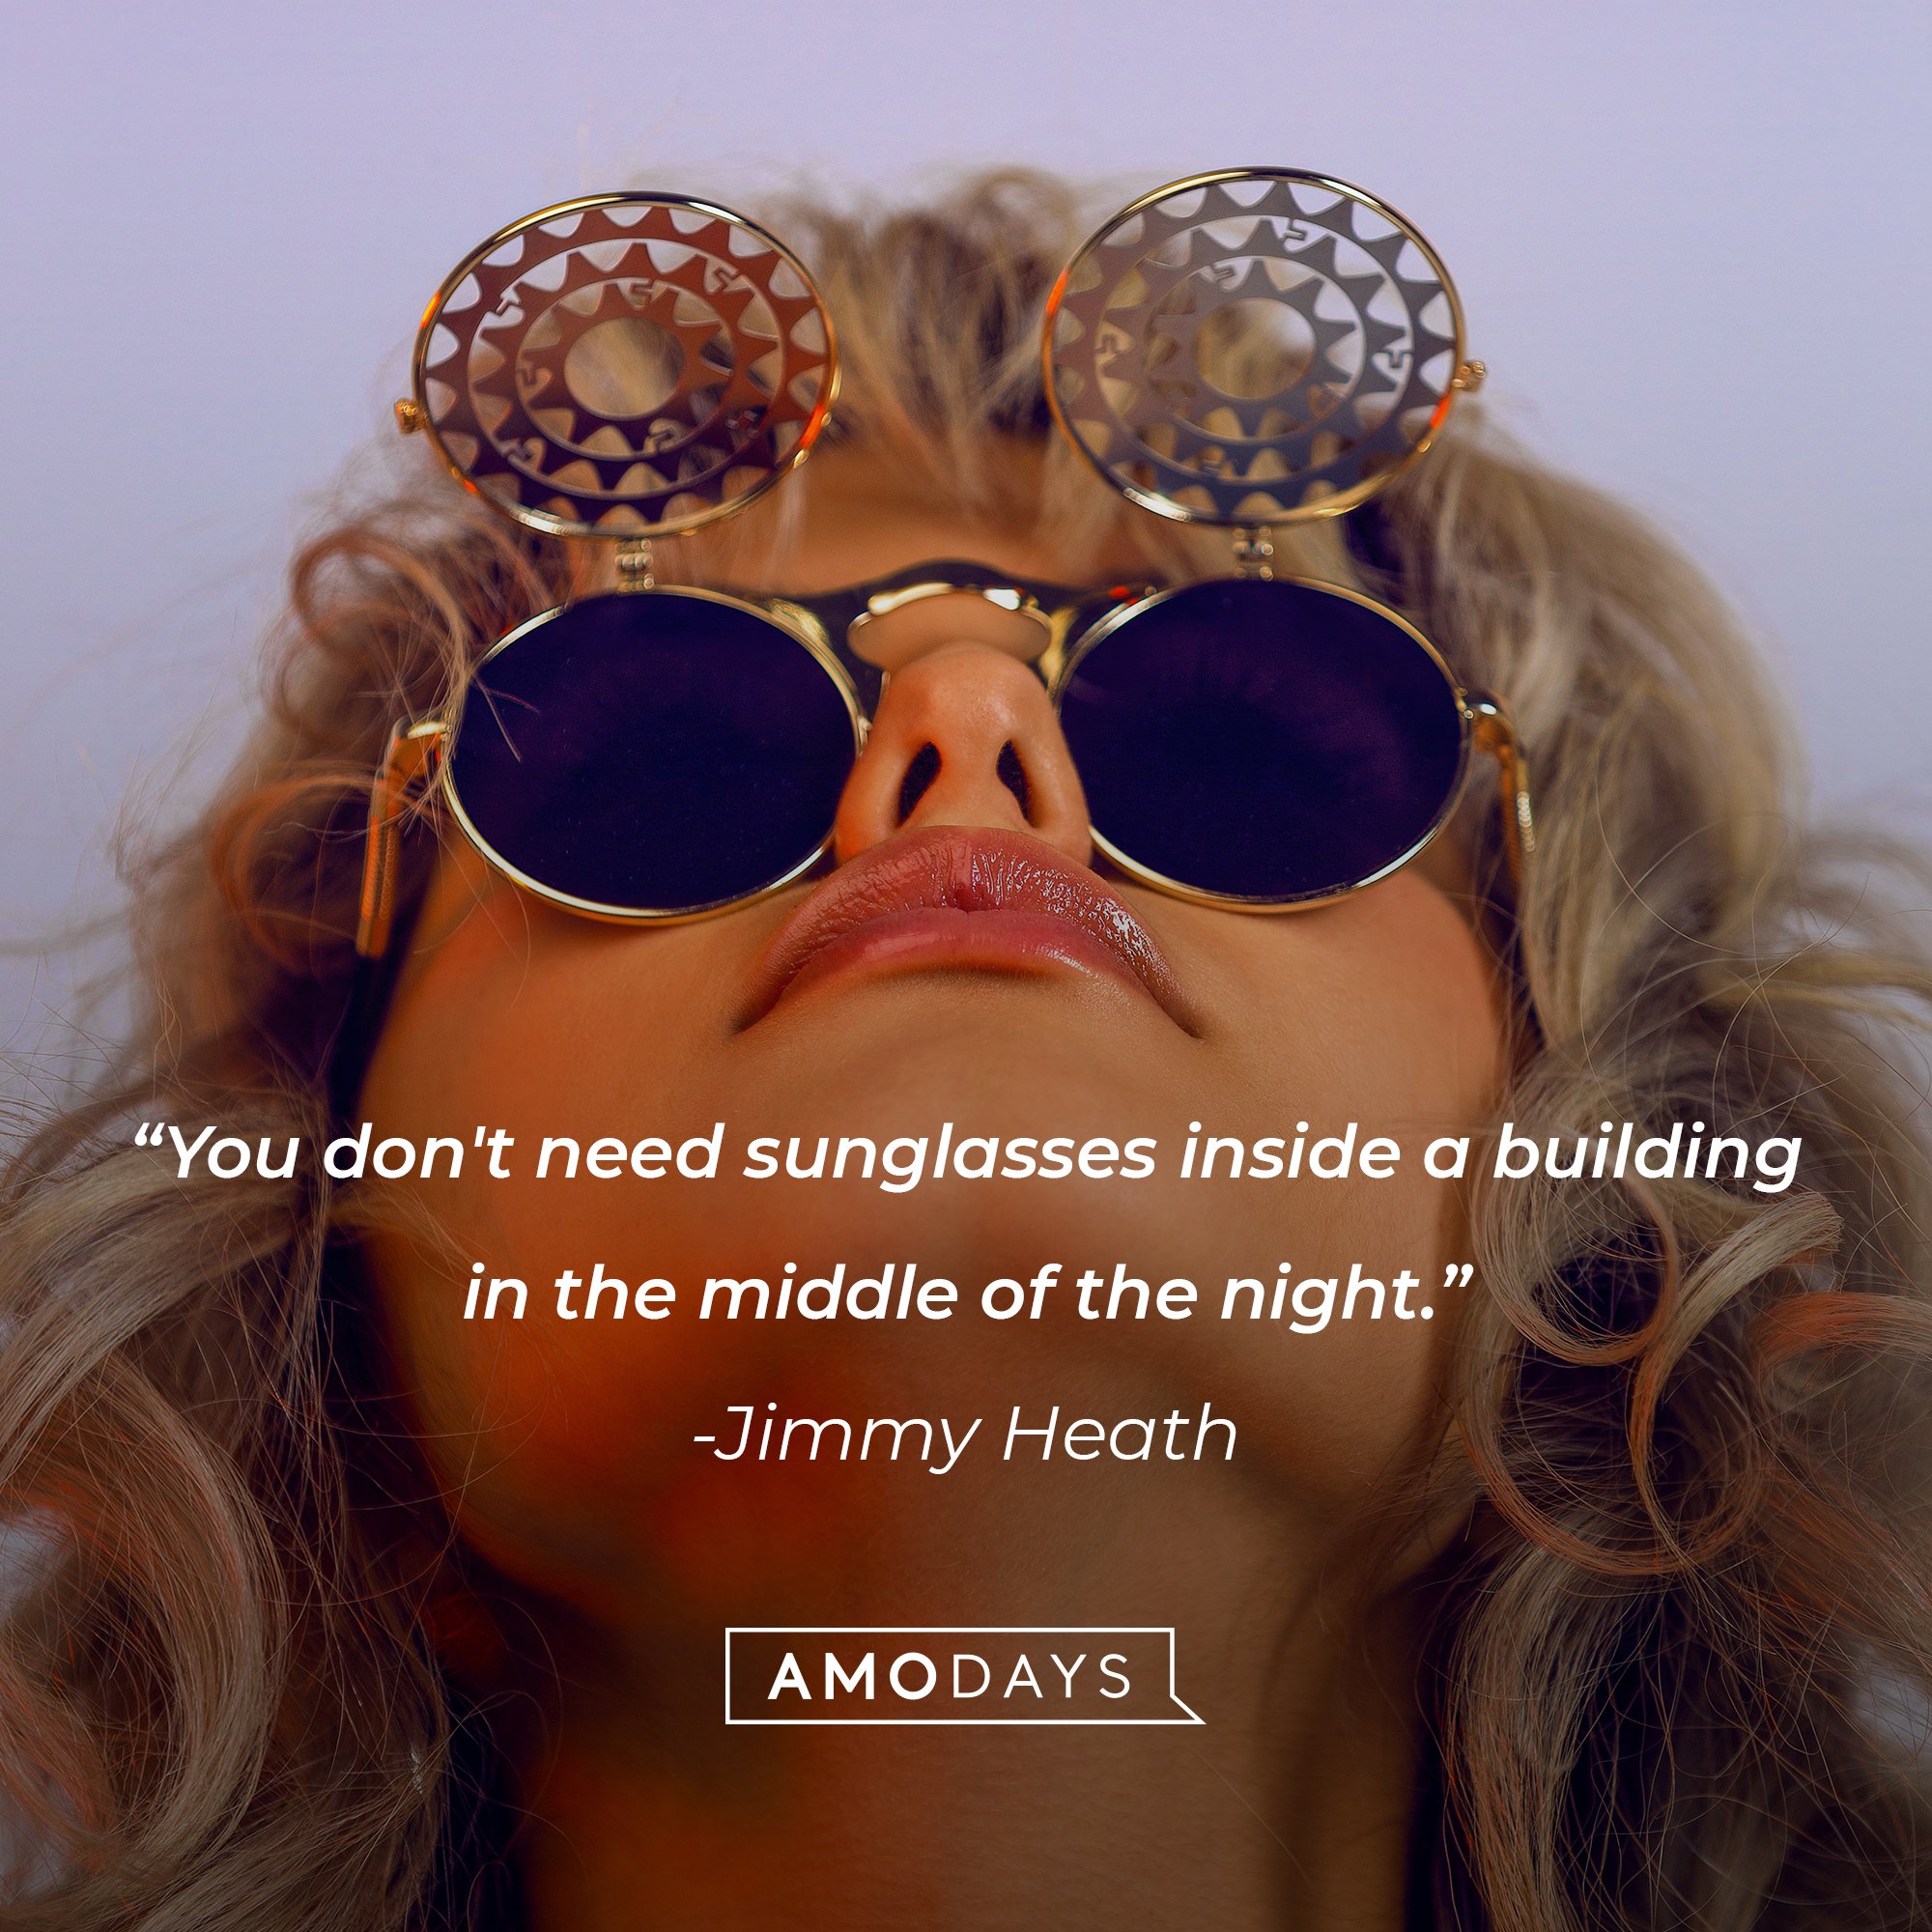 Jimmy Heath’s quote: "You don't need sunglasses inside a building in the middle of the night." | Image: AmoDays  